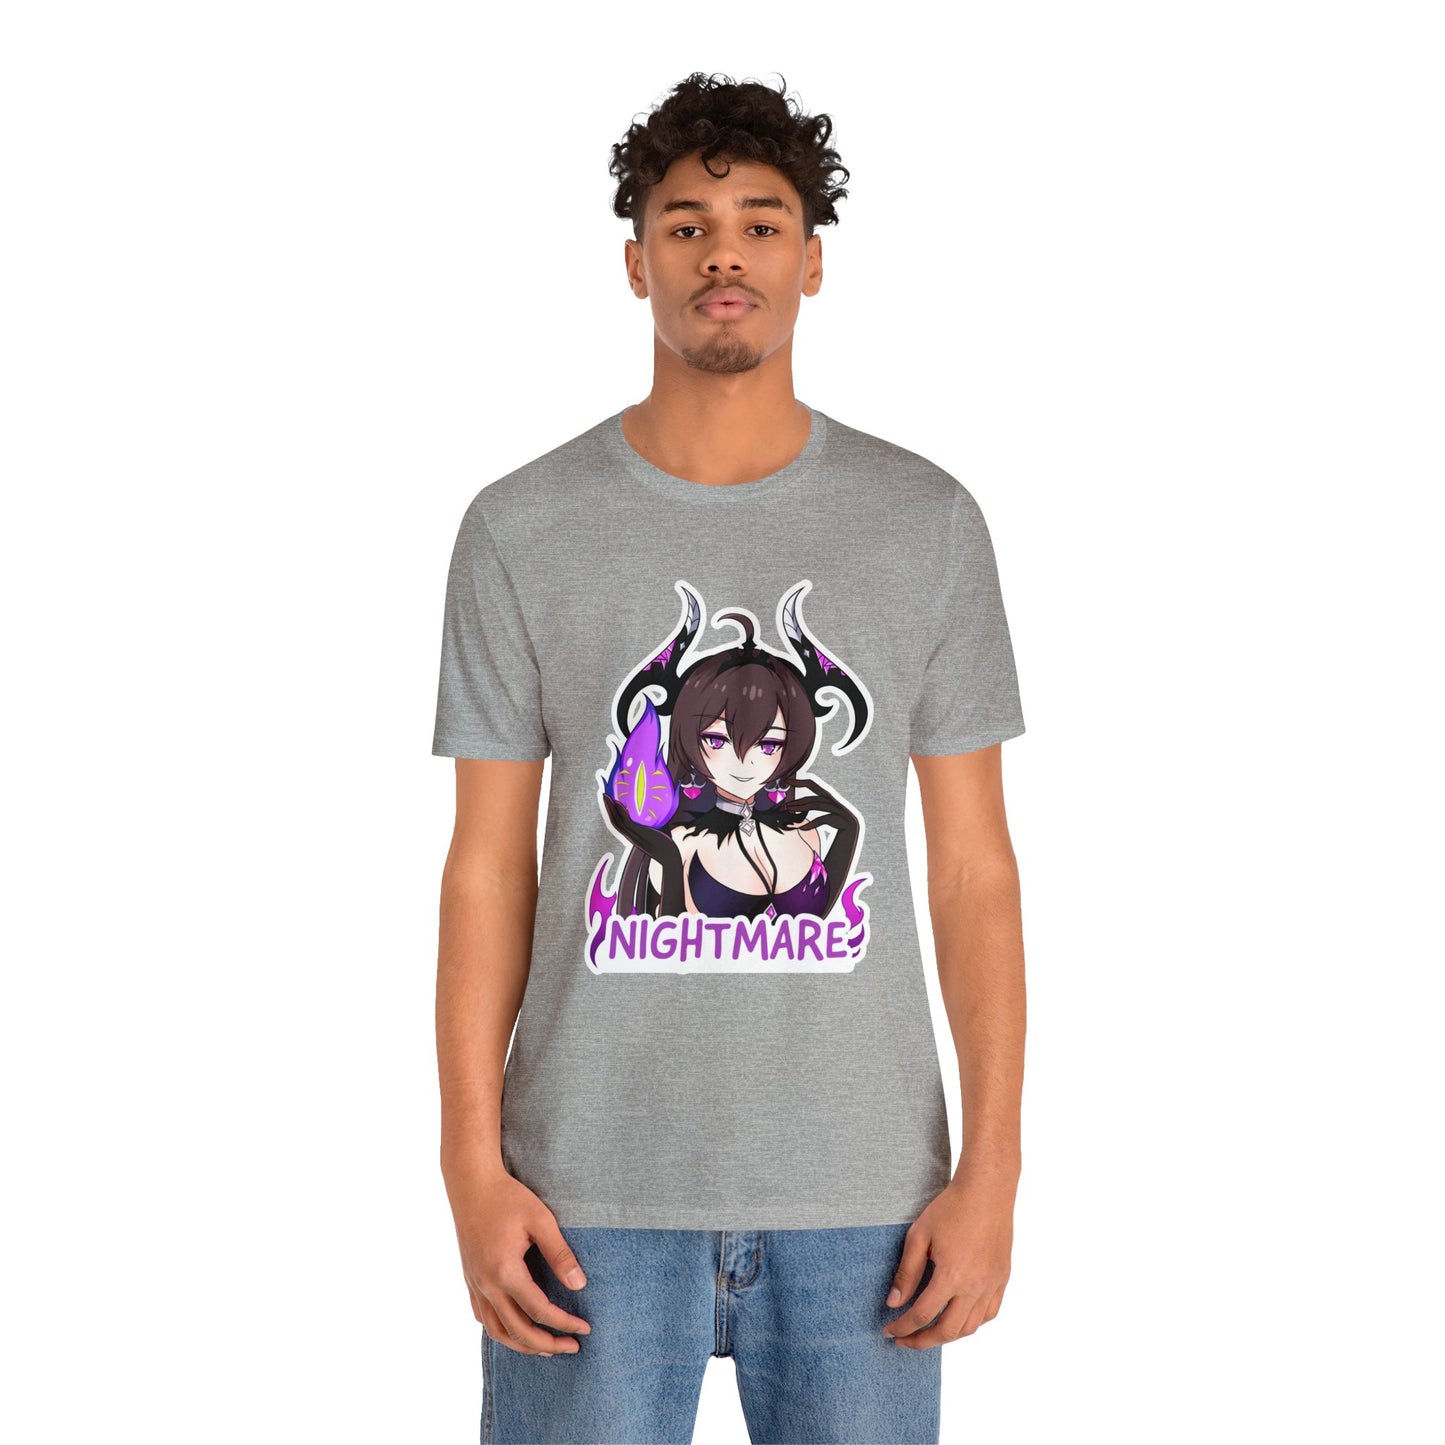 Specter Tenebria "Nightmare" by BruLee - Epic Seven T-Shirt (Unisex)